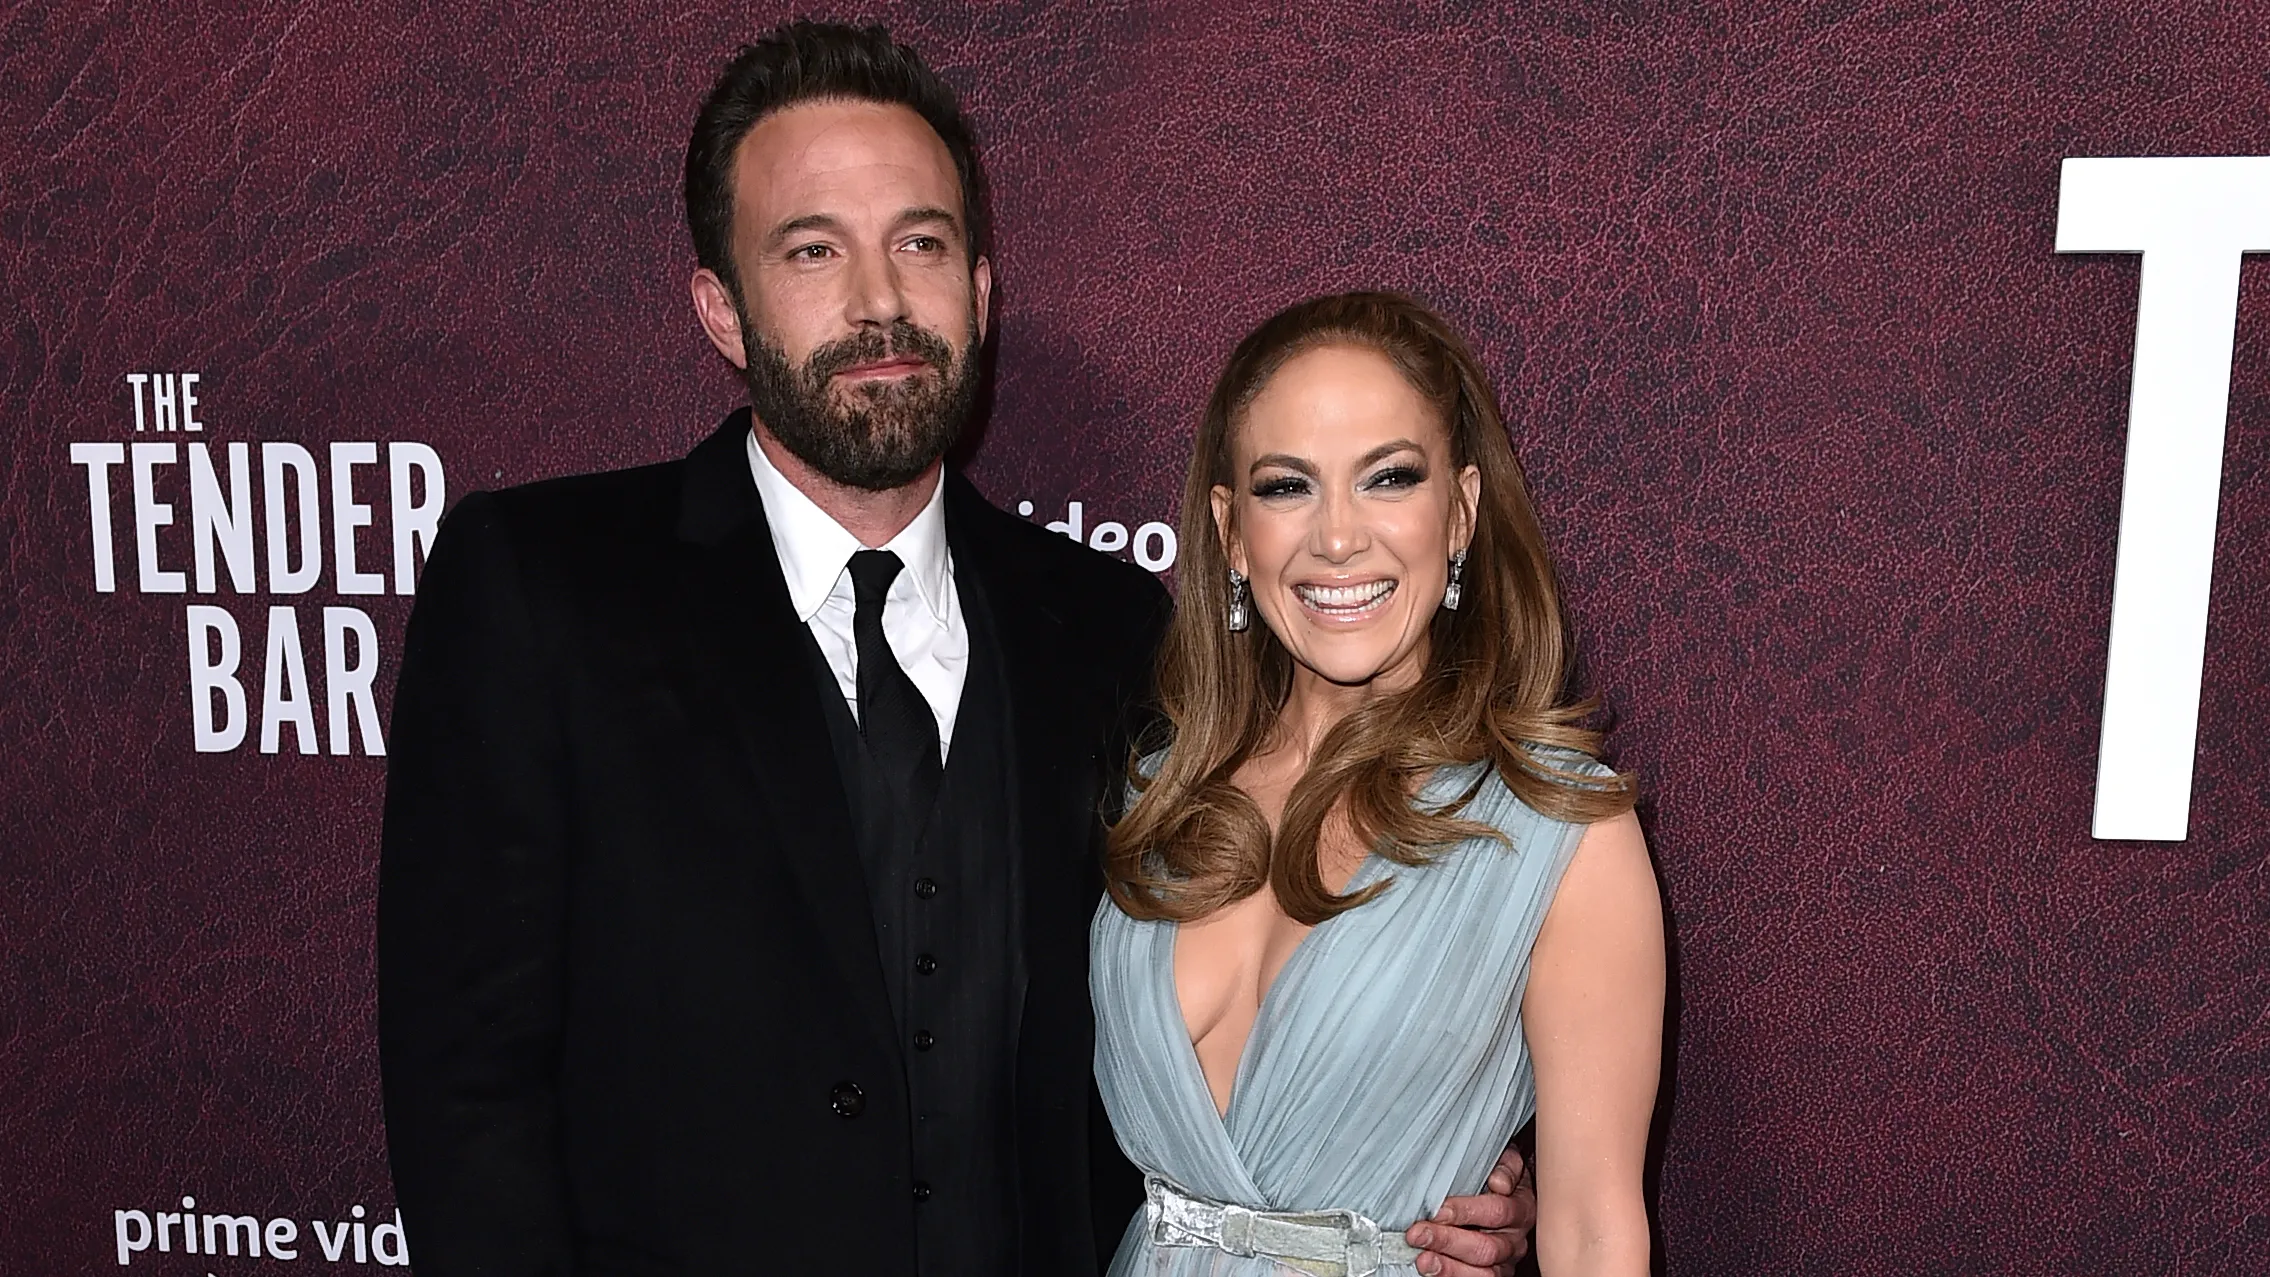 Ben Affleck and Jennifer Lopez tie the knot nearly two decades after first falling in love